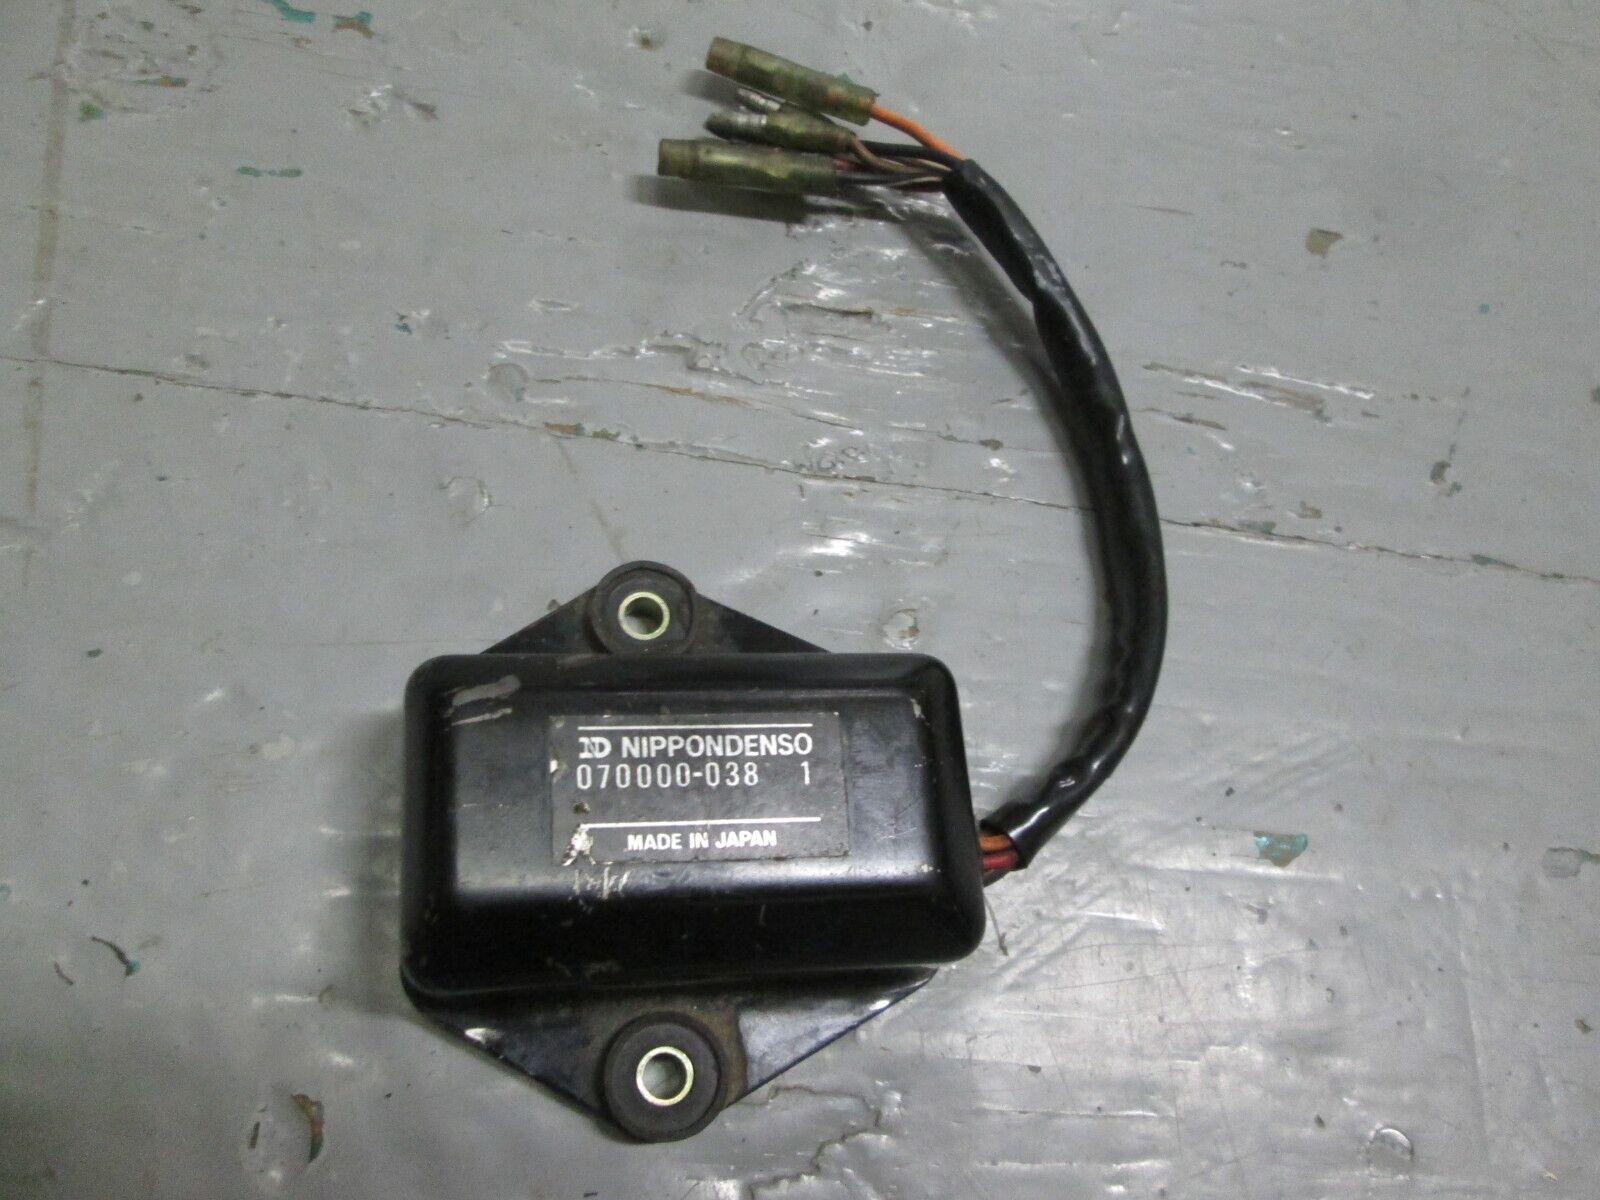 TESTED VINTAGE 1980 RD400 CDI  Ignition unit 2R8-85540-51-00 ( 070000-038 ND )